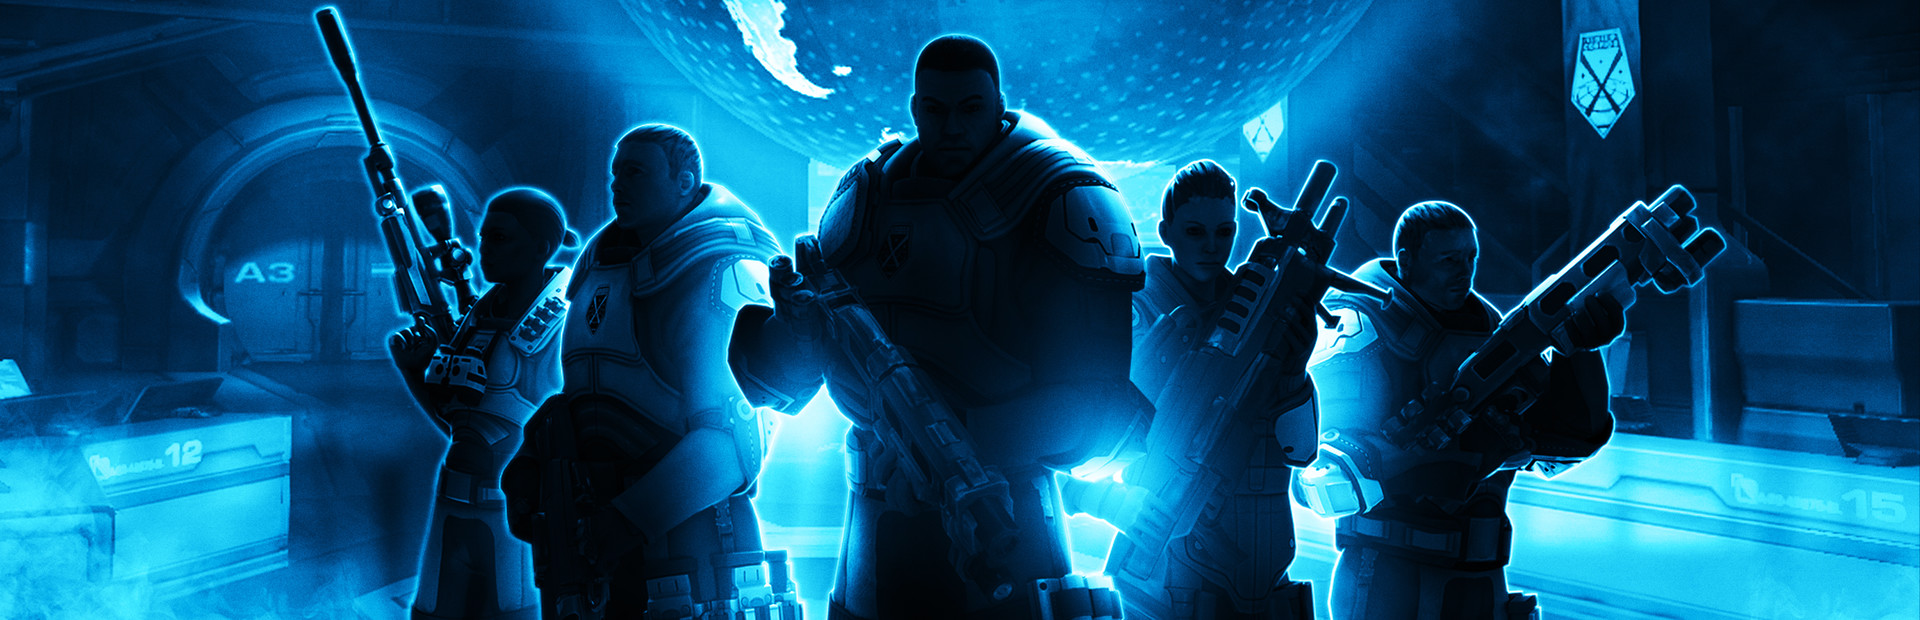 XCOM: Enemy Unknown cover image